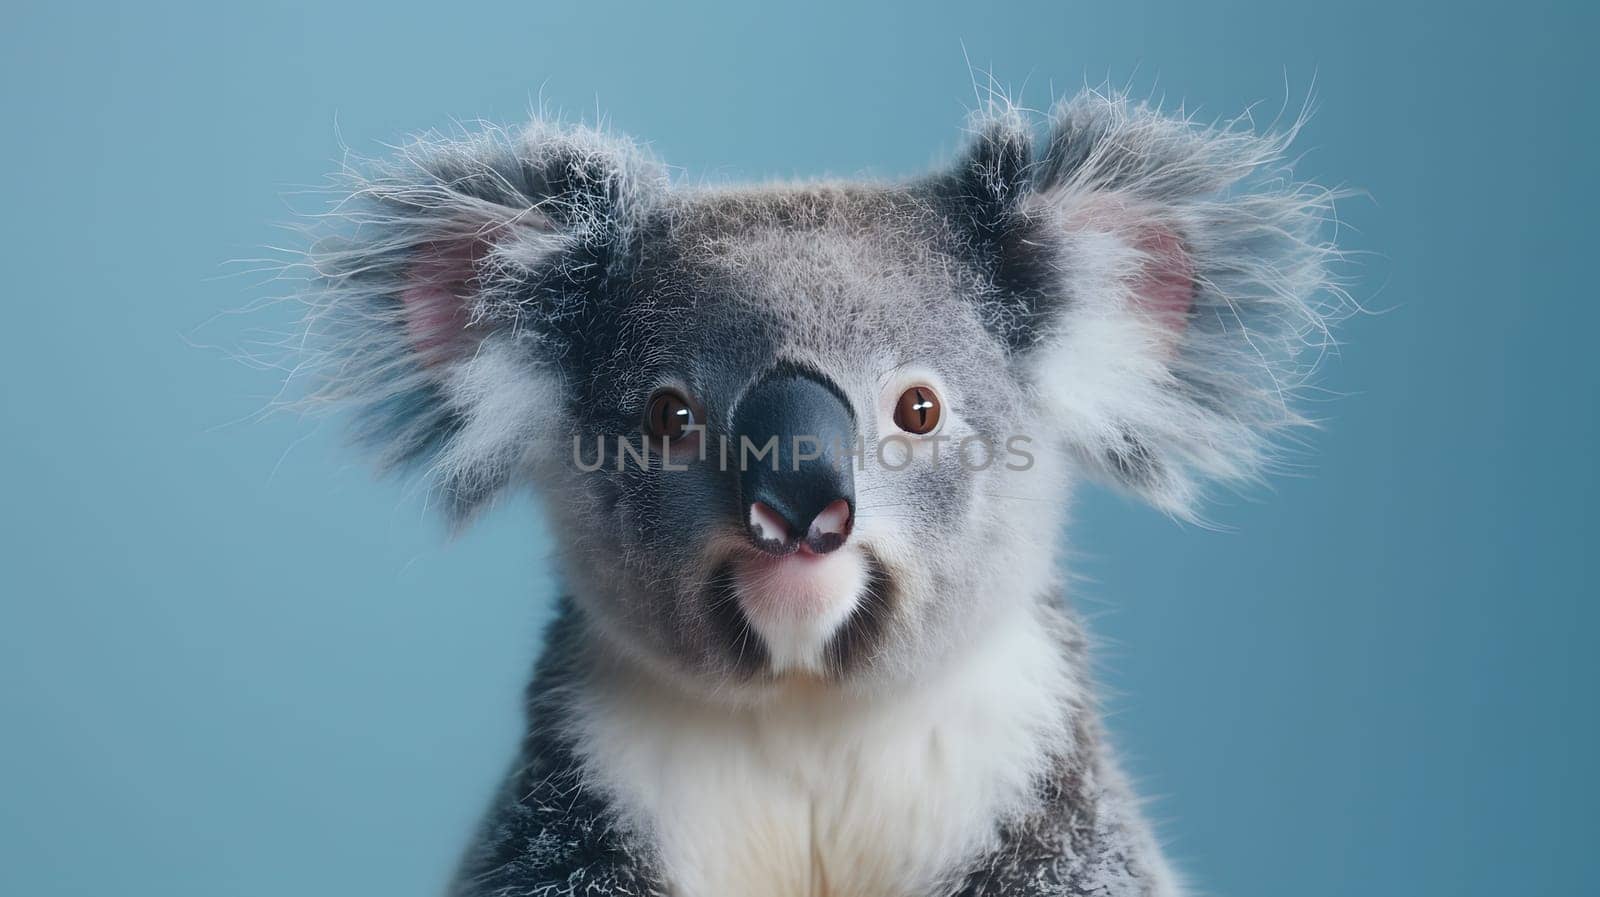 A curious terrestrial animal, the koala bear, with electric blue fur, is sticking its tongue out and looking at the camera in this wildlife photo caption